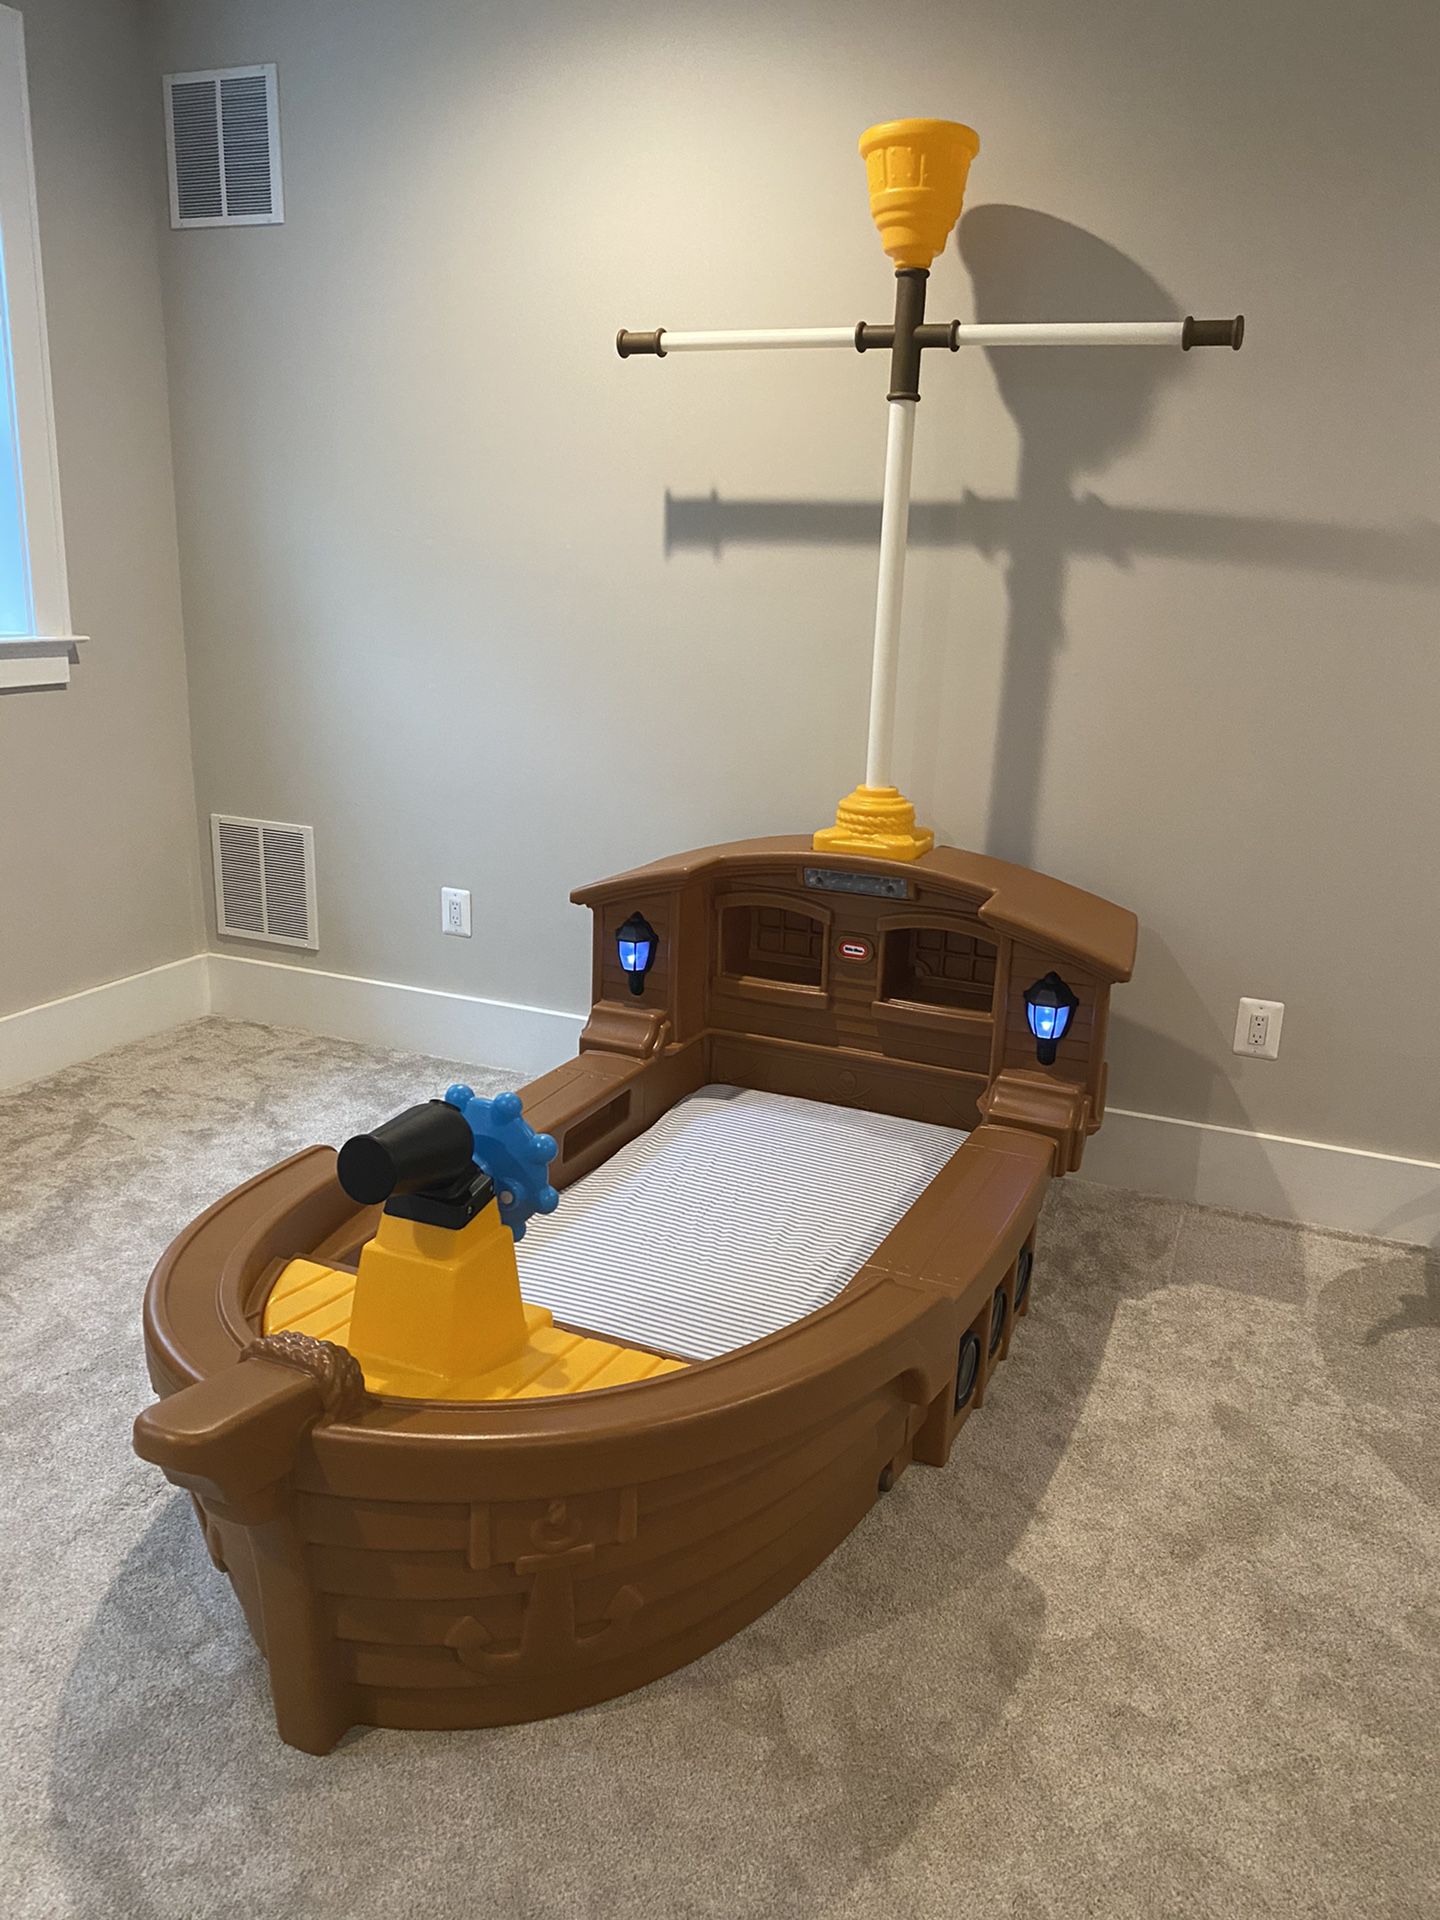 Little Tikes Pirate Ship Boat Bed - doubles as ball pit!!